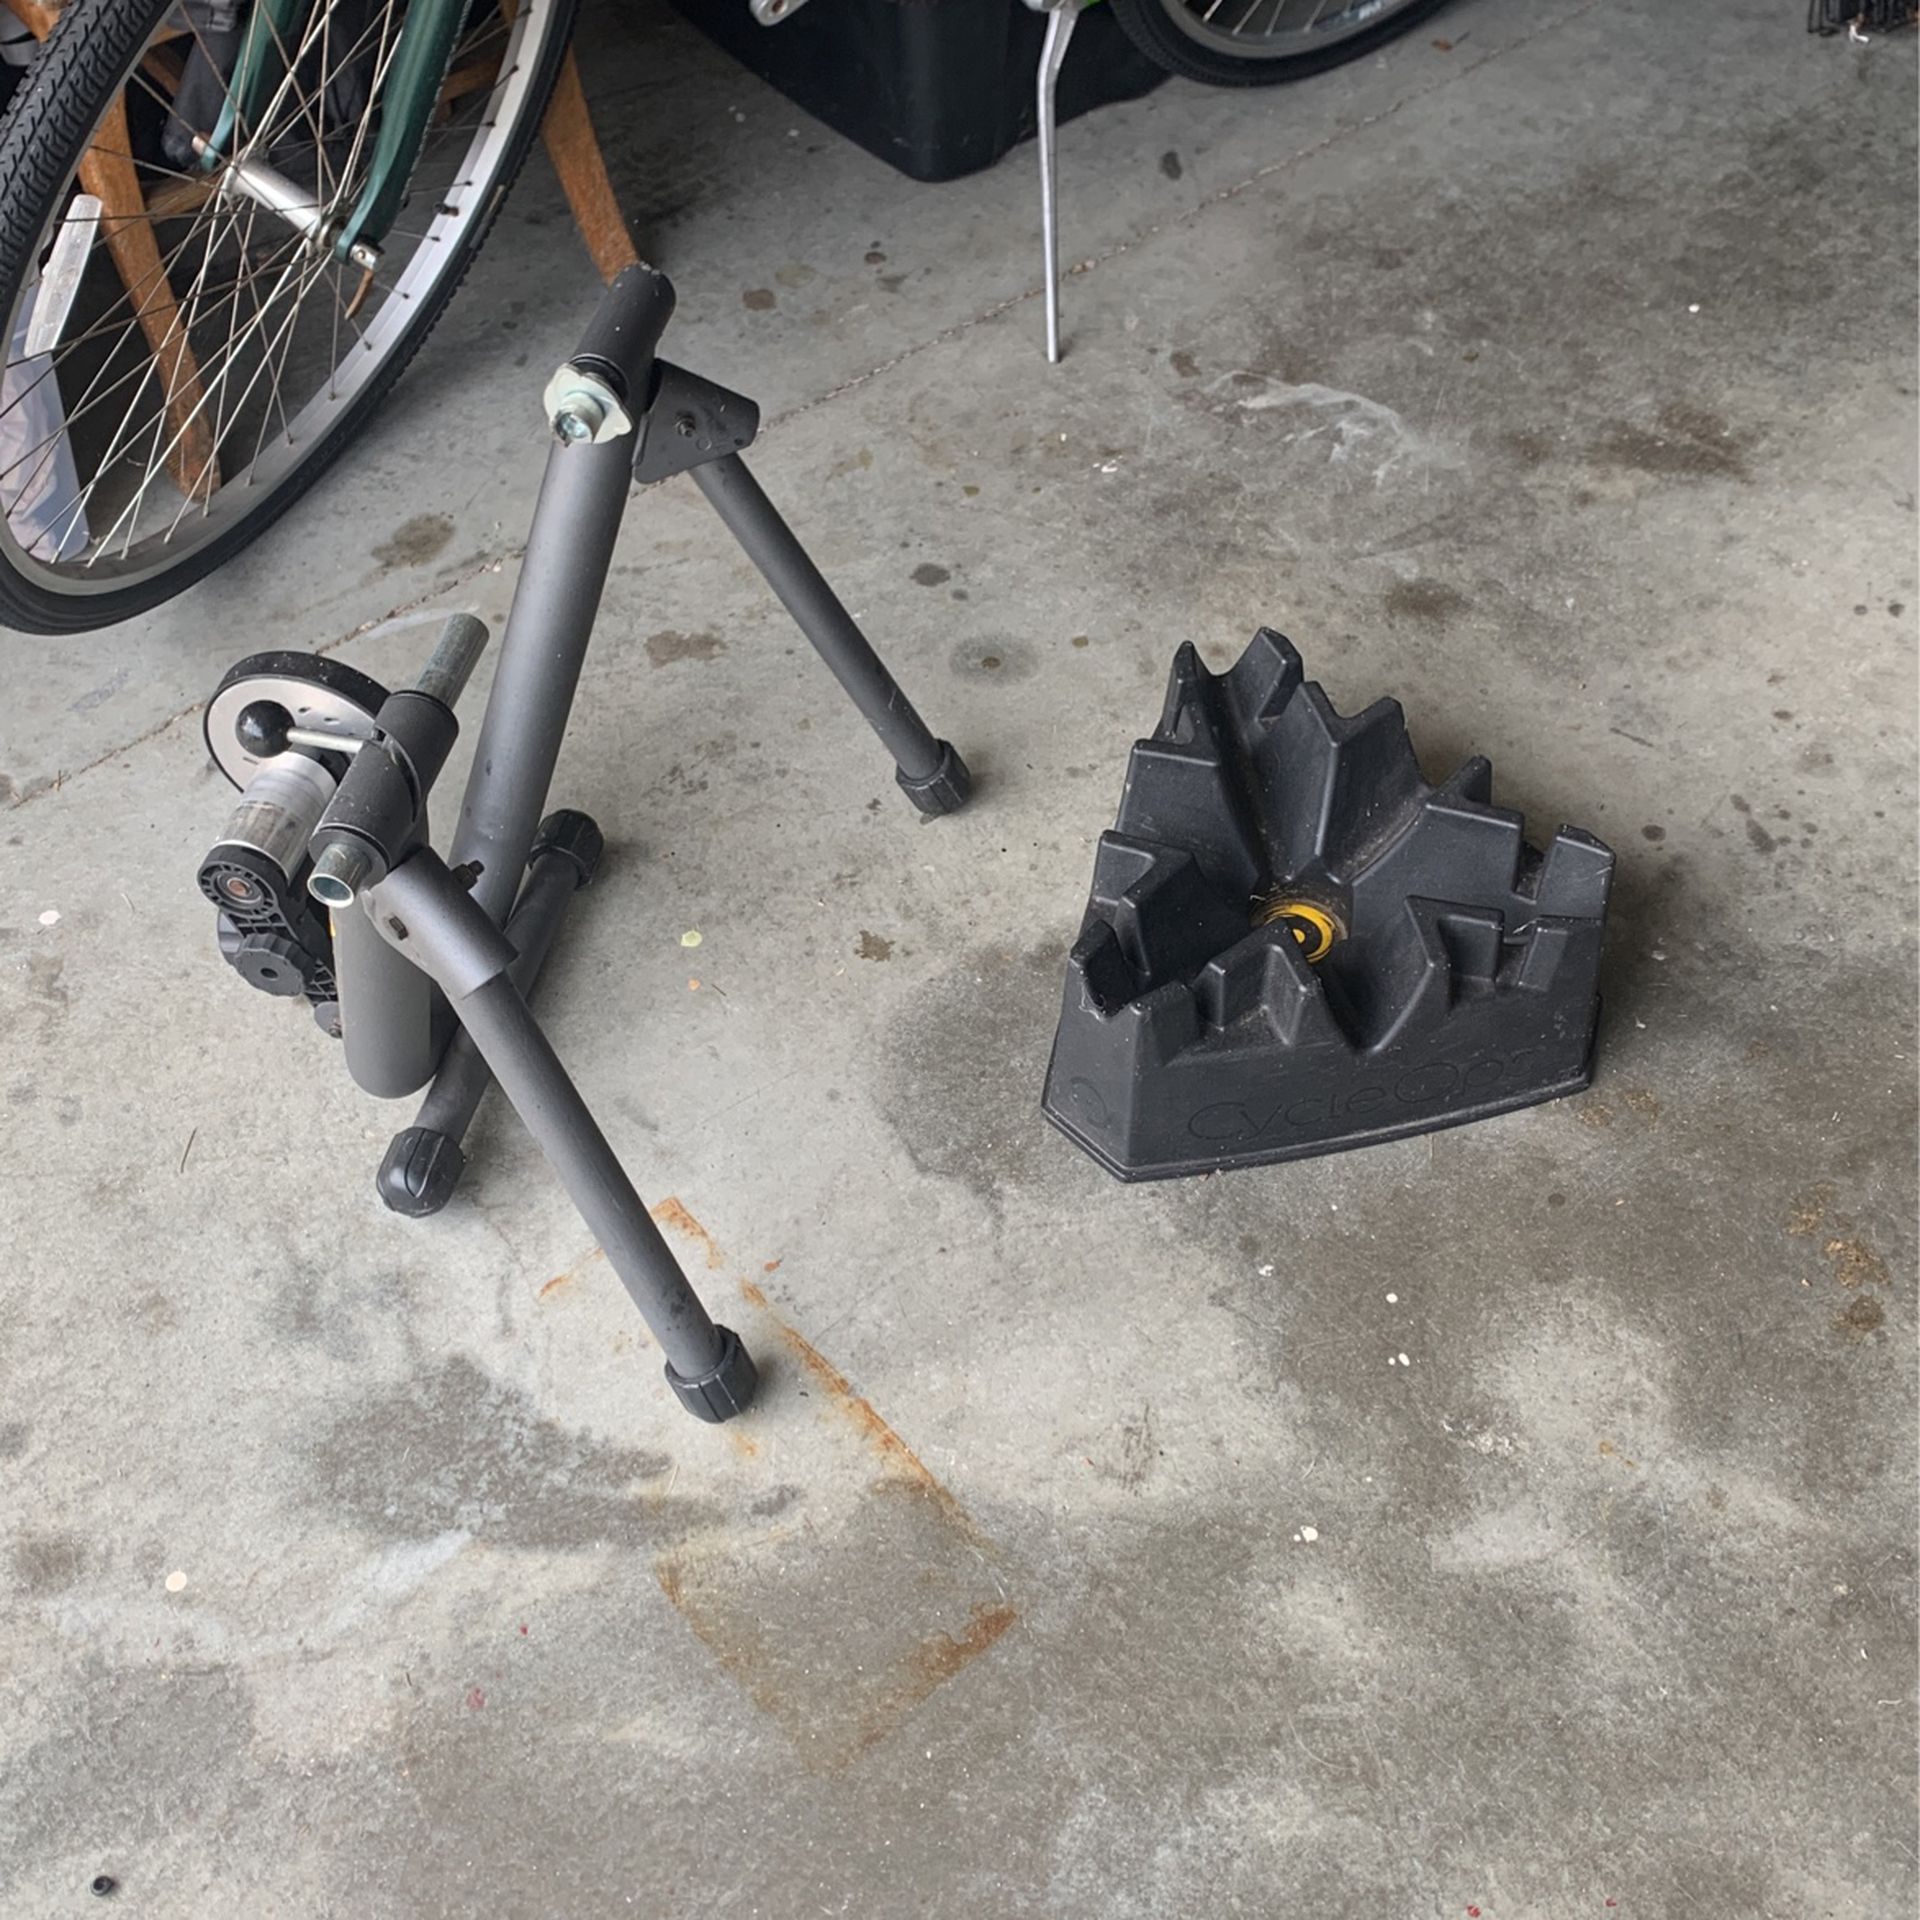  Bicycle Stationary Mount